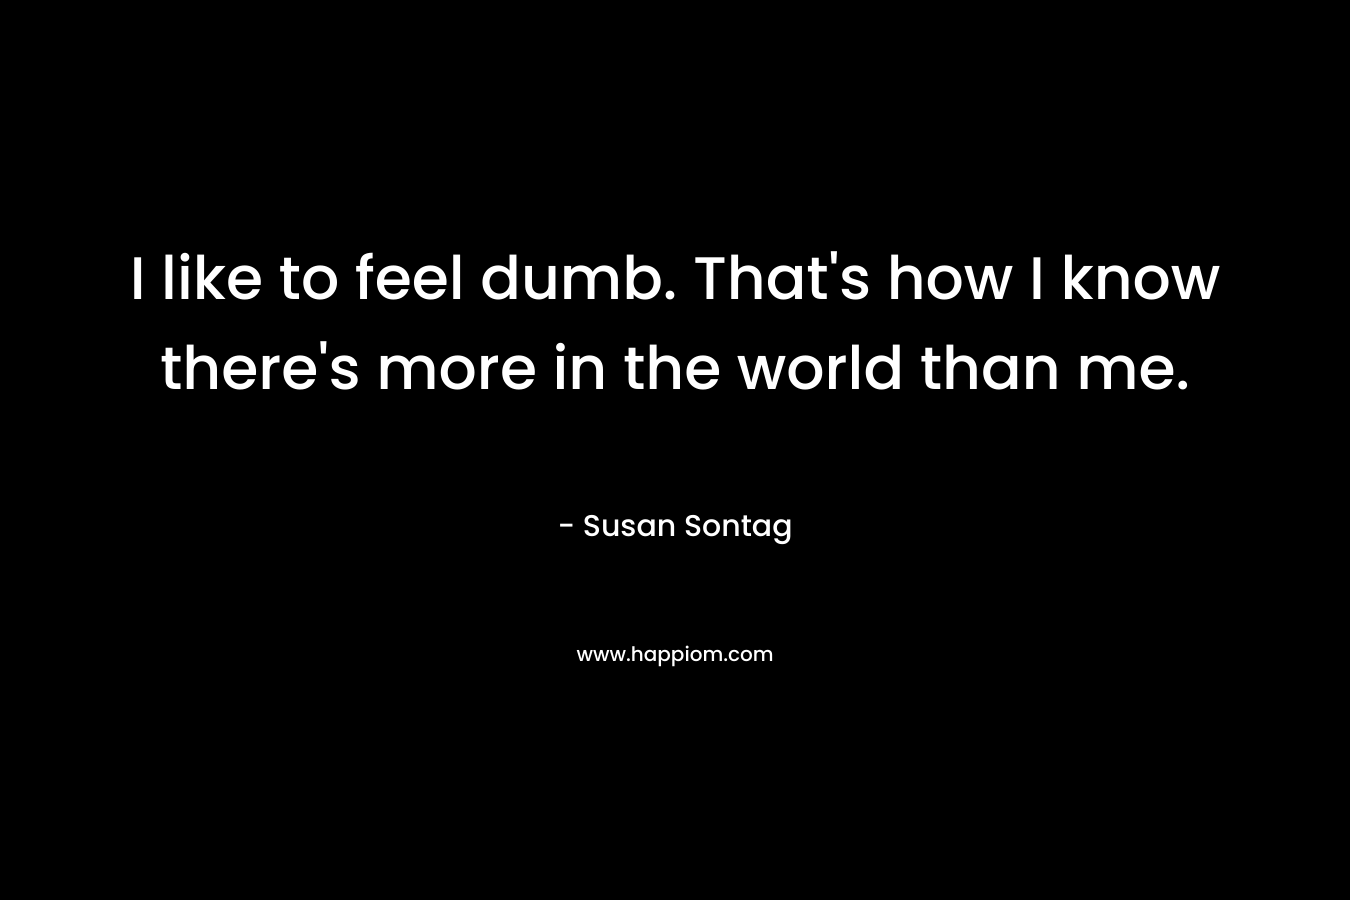 I like to feel dumb. That’s how I know there’s more in the world than me. – Susan Sontag